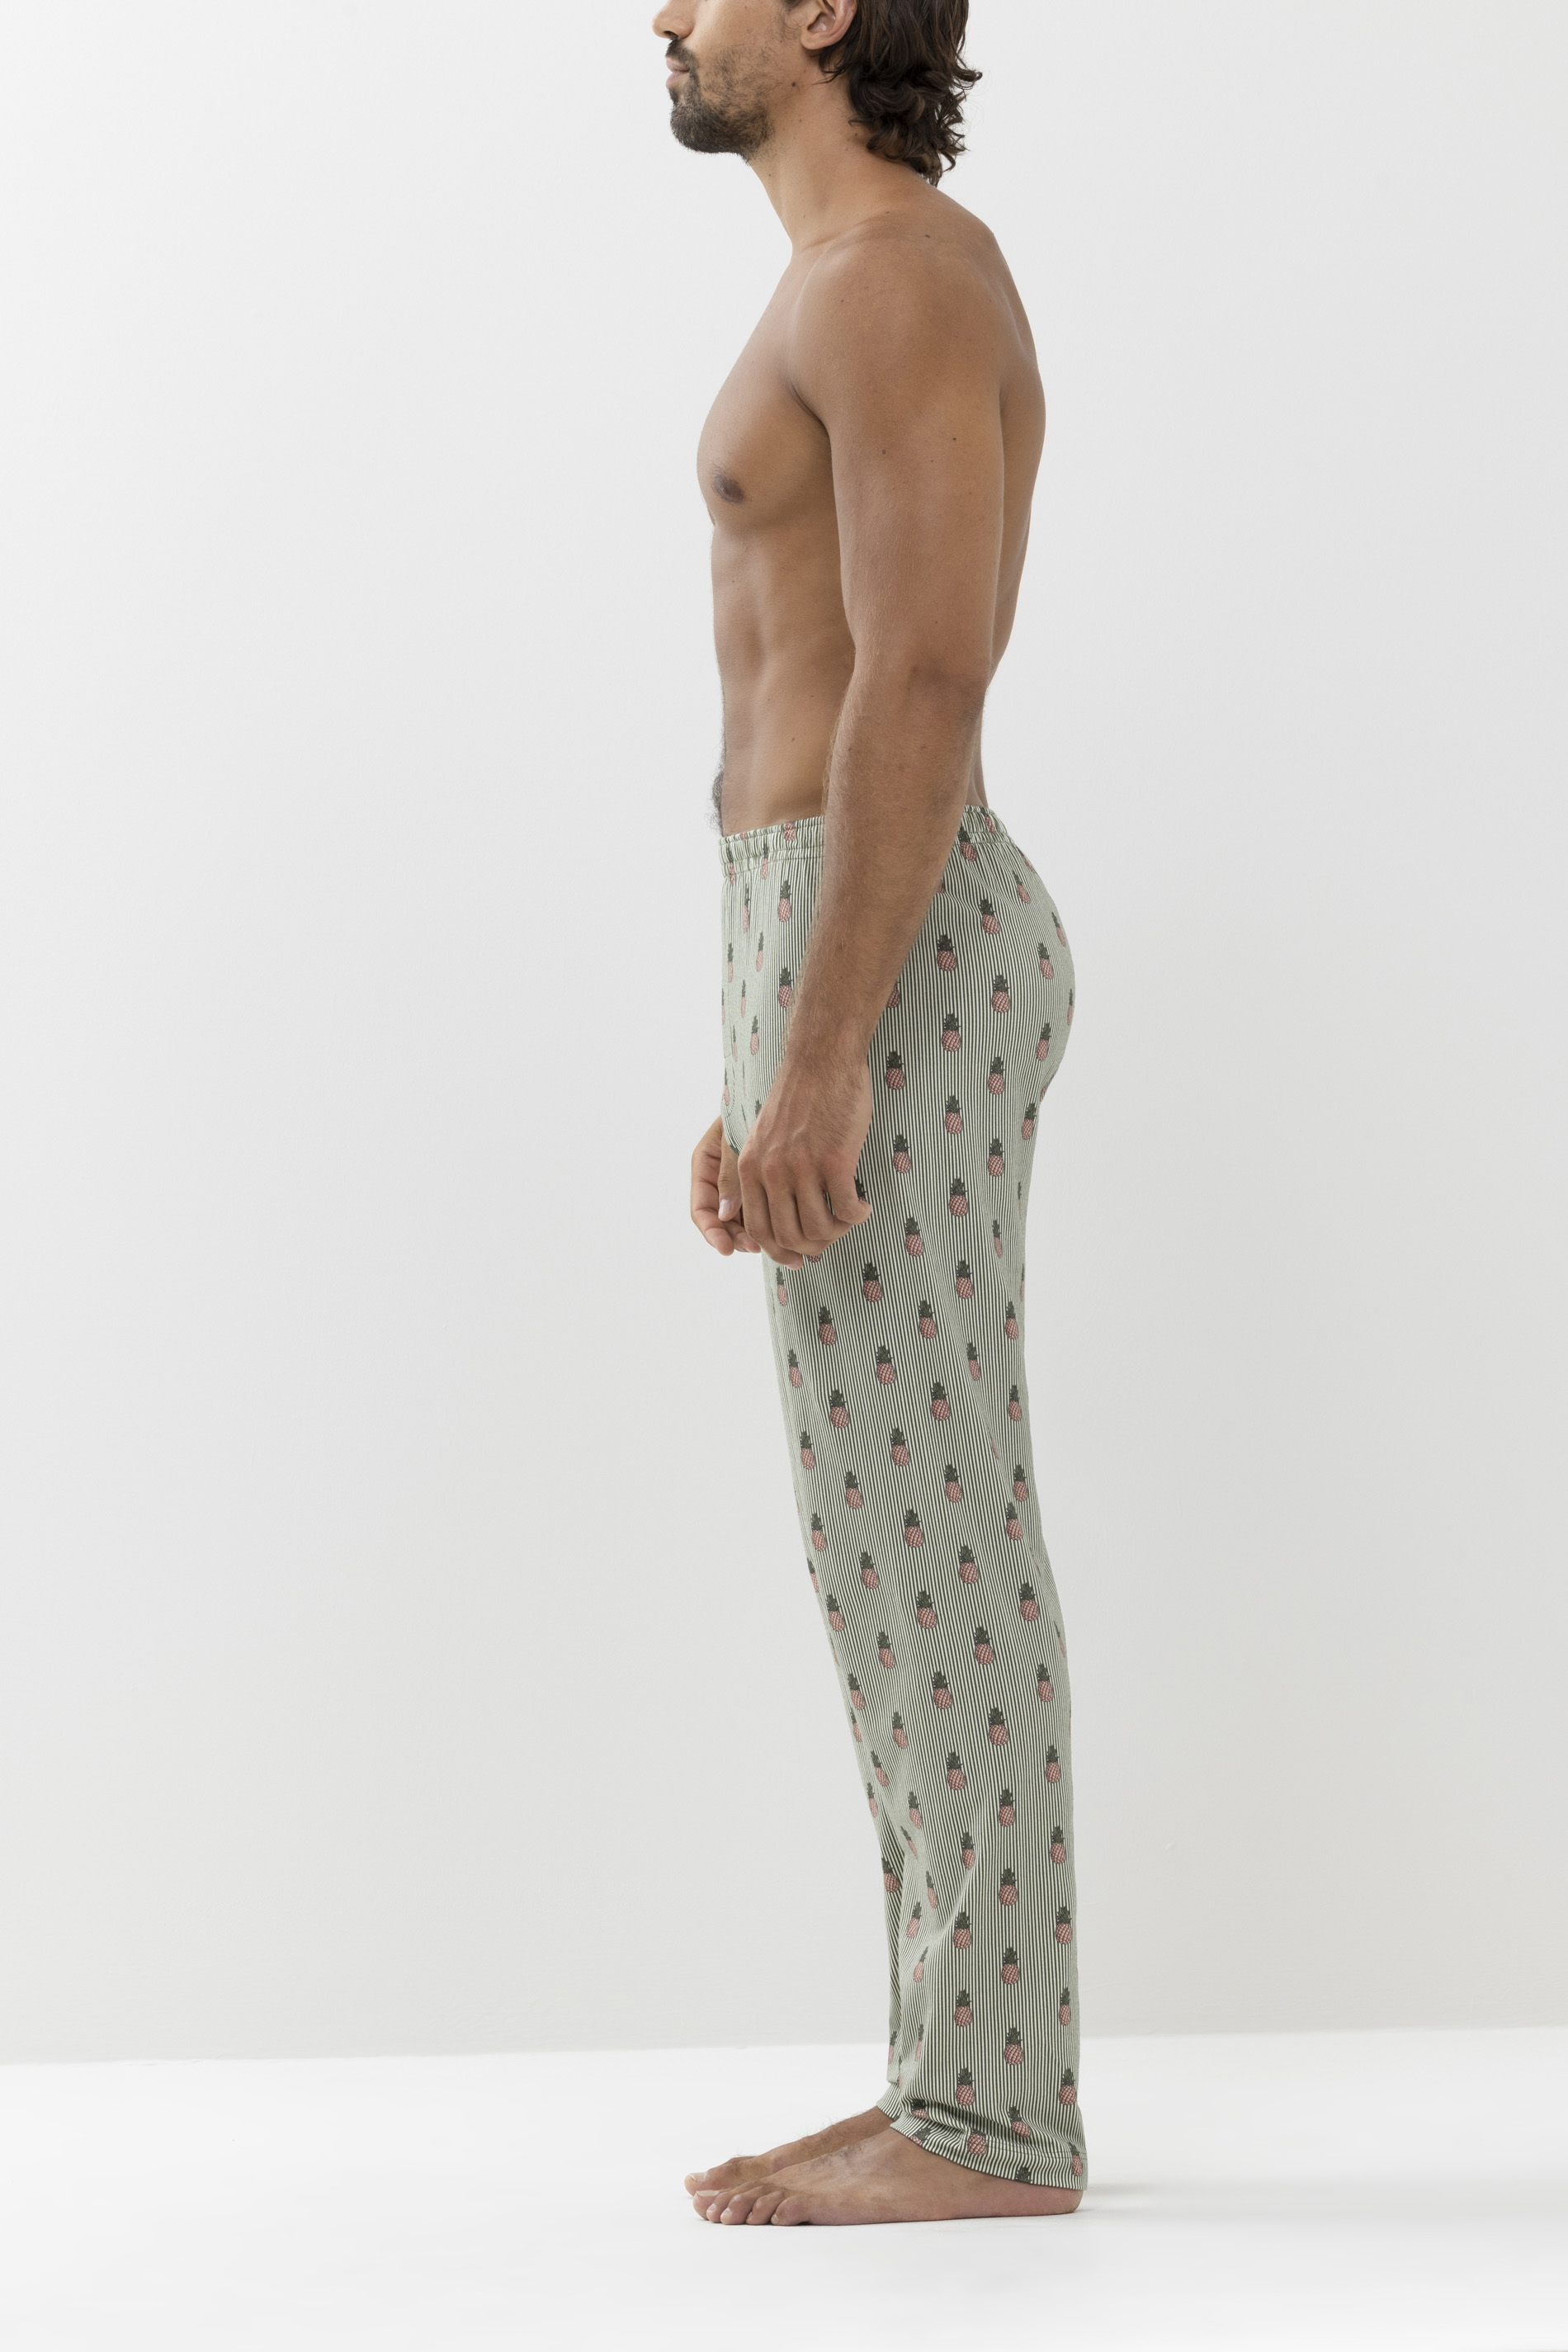 Long bottoms Serie Pineapple Detail View 02 | mey®